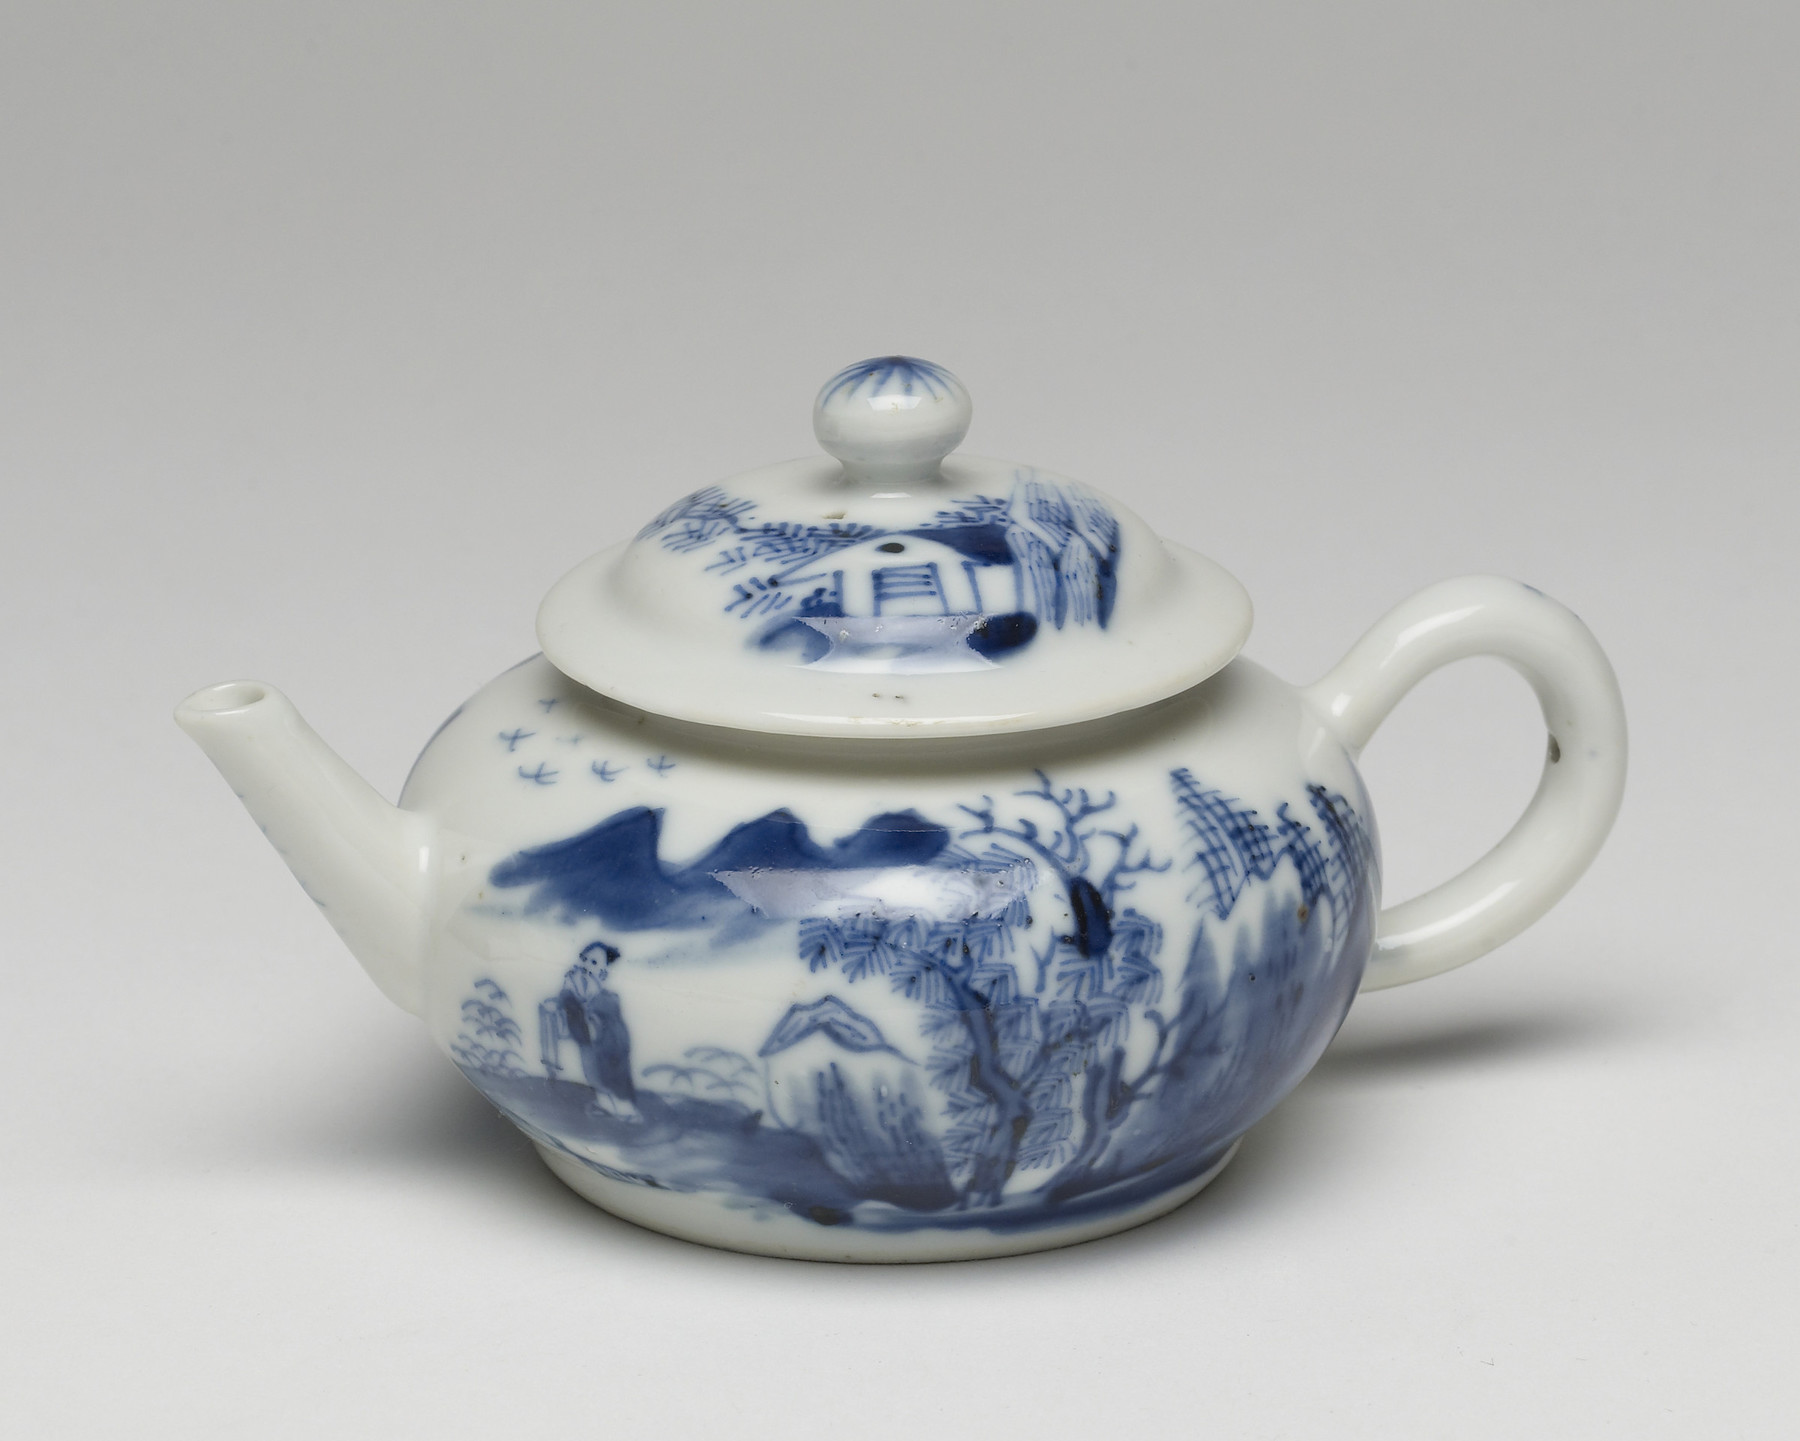 Image for Teapot with Figures in a Mountain Landscape